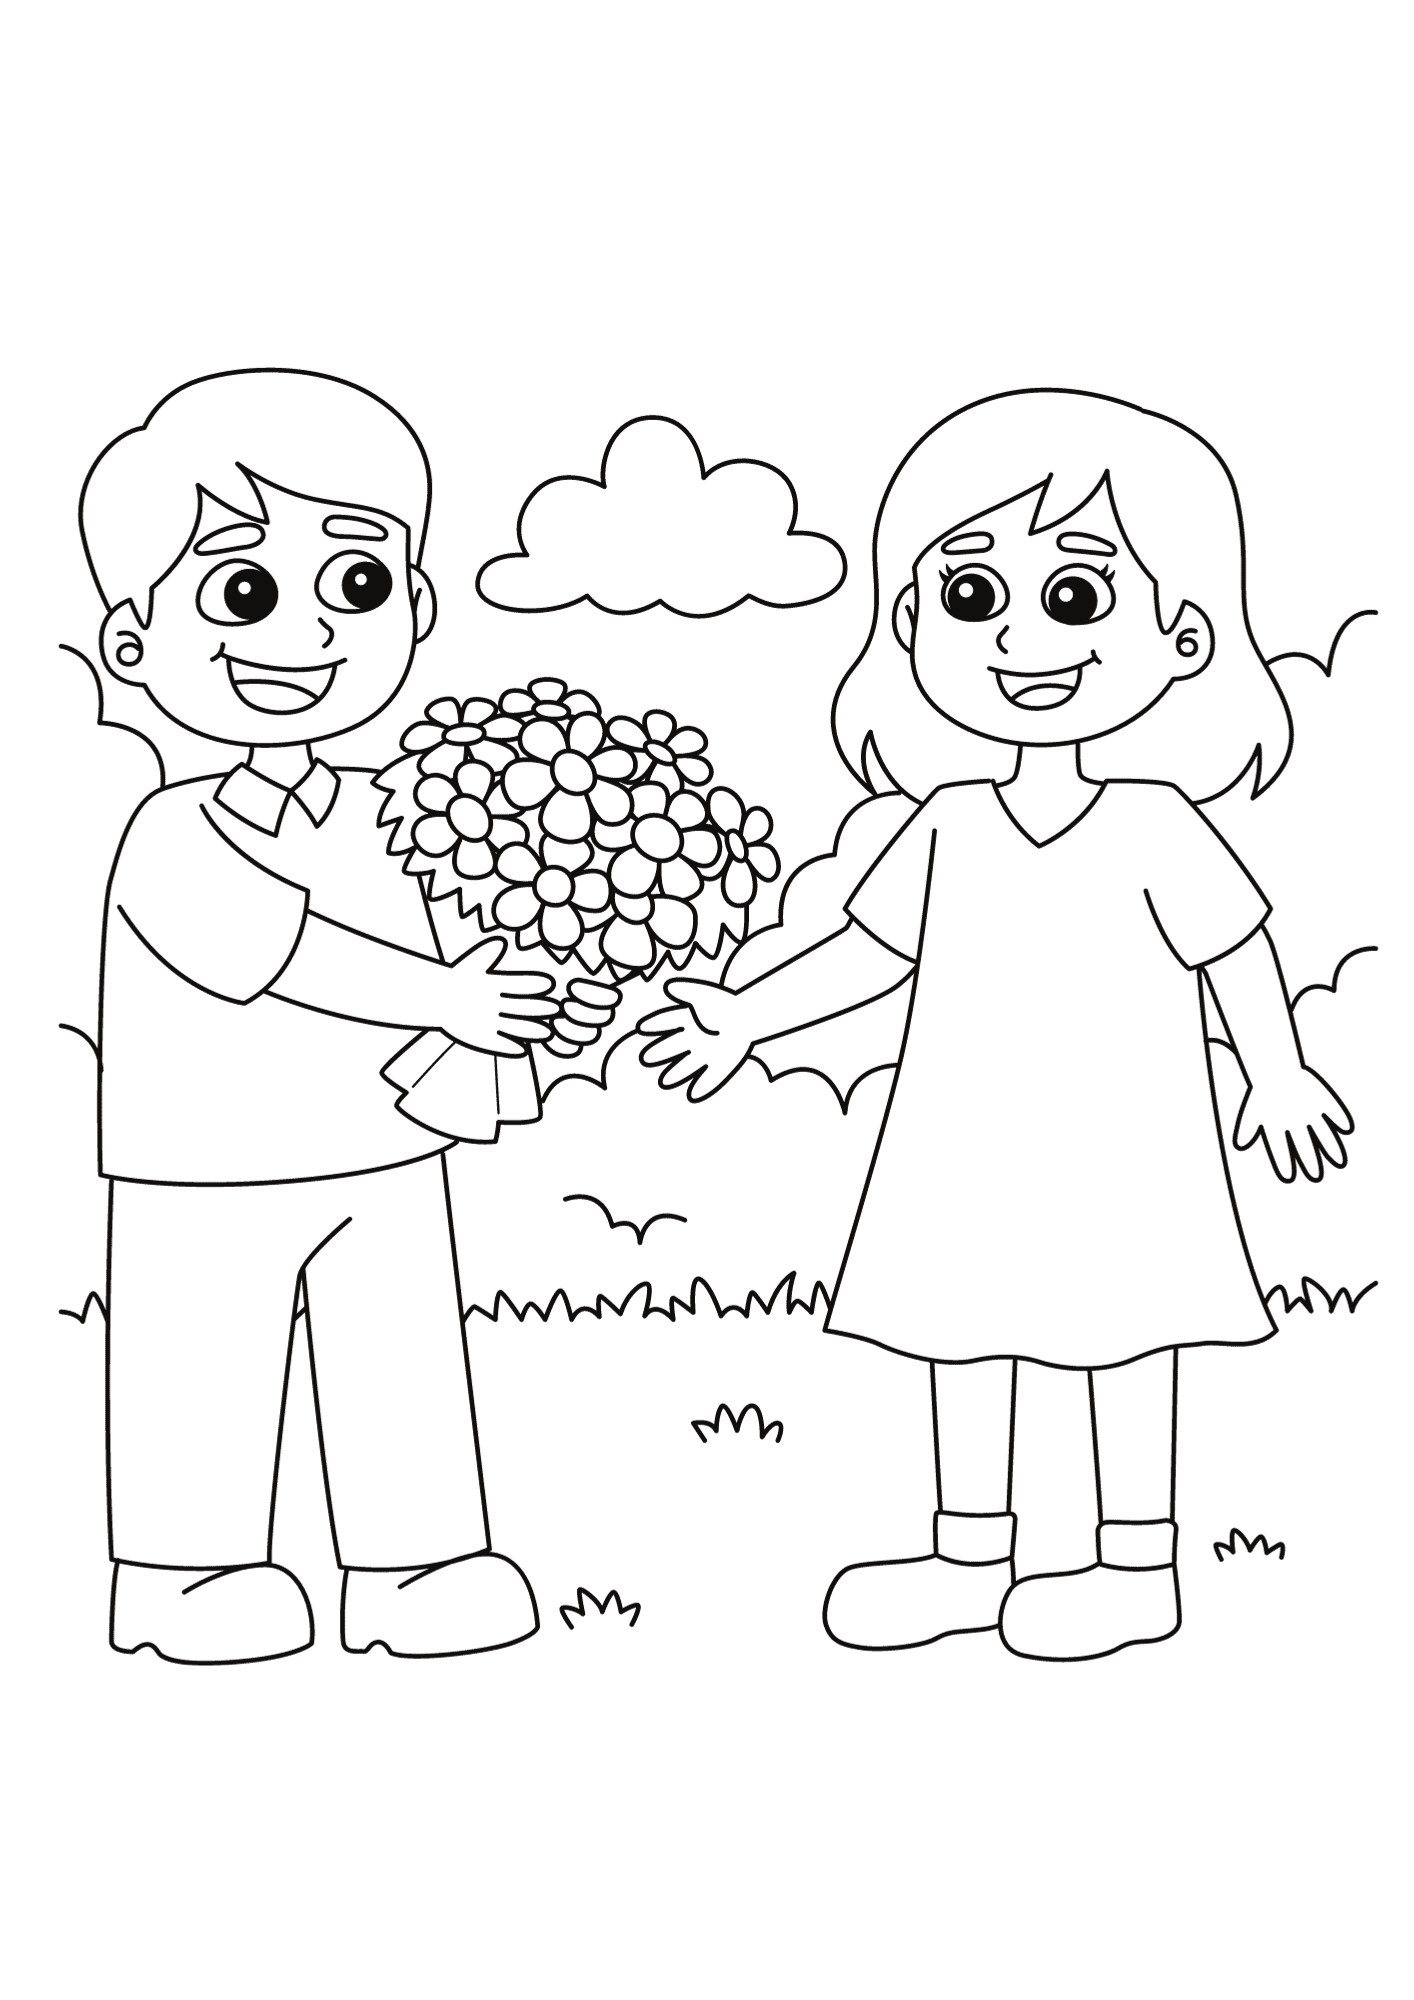 Valentine's Day Image Coloring Page